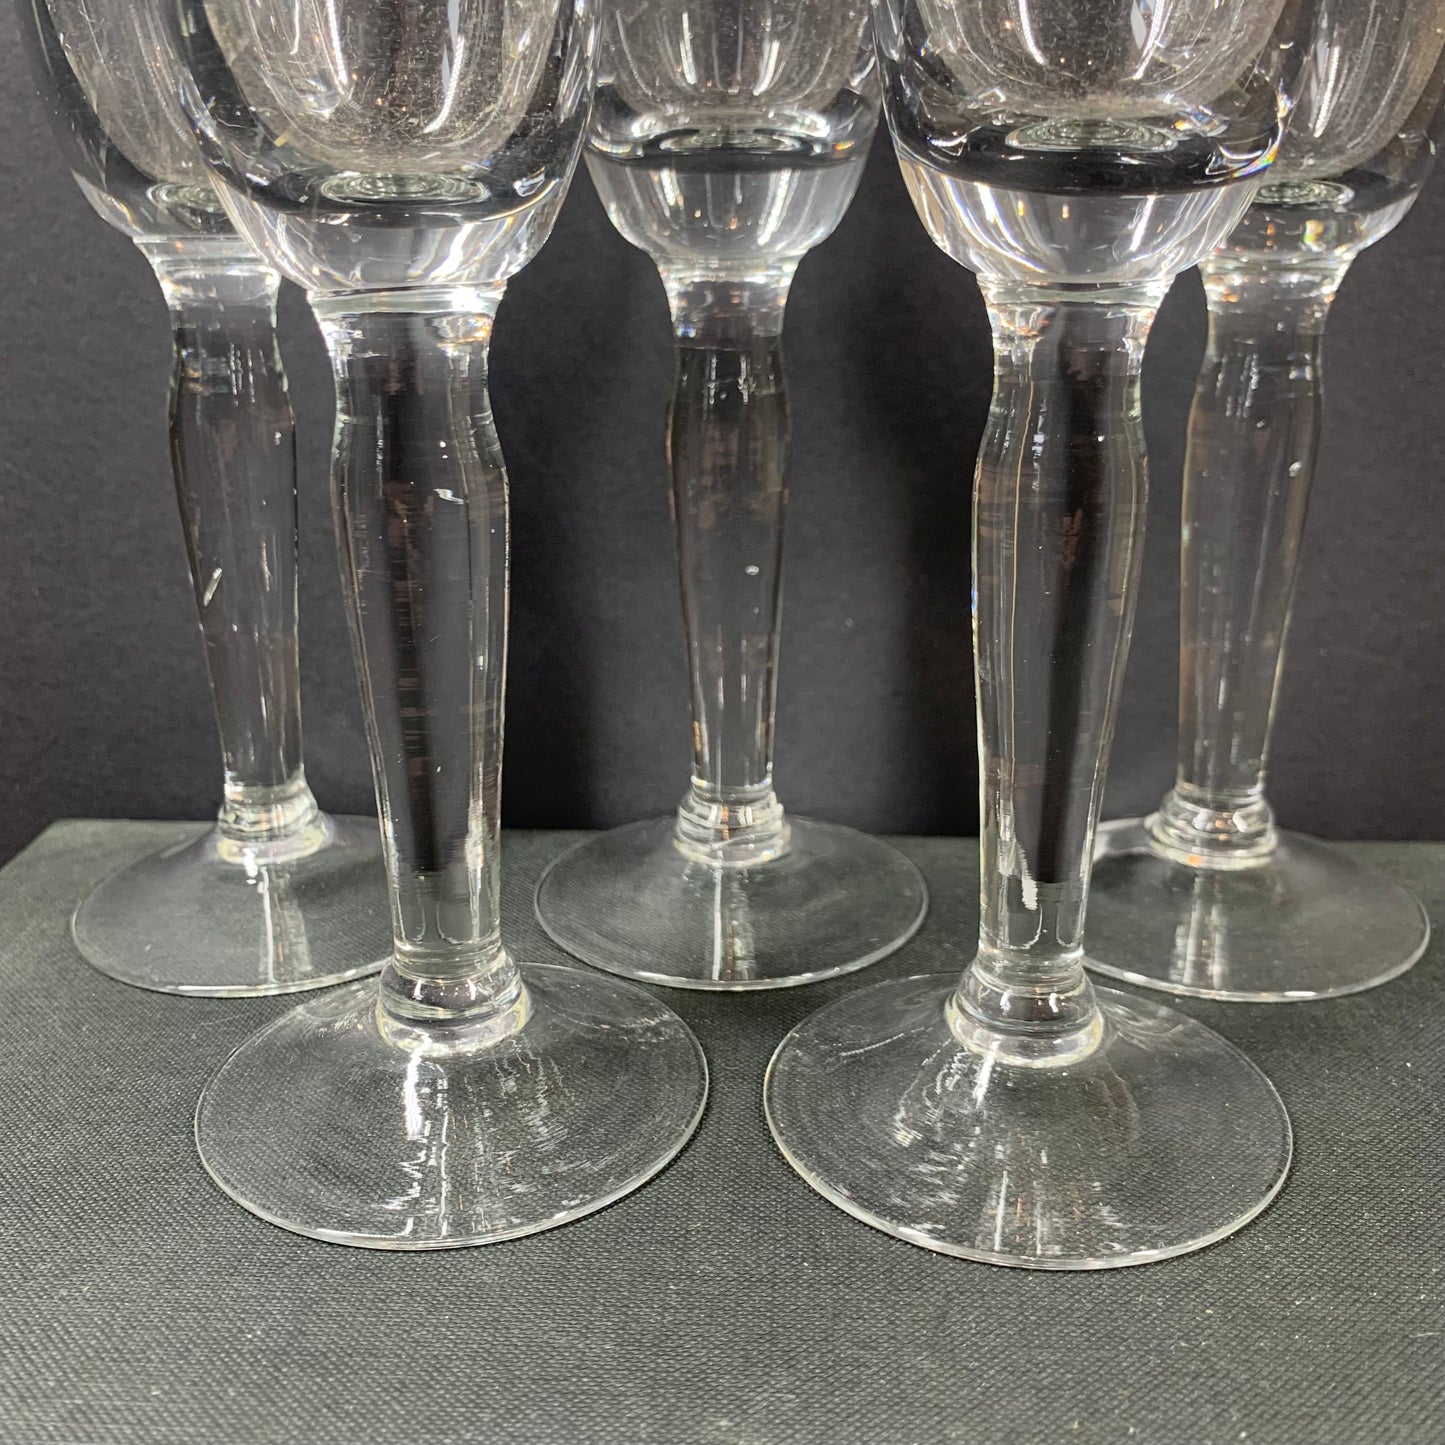 Antique molded glass champagne flutes